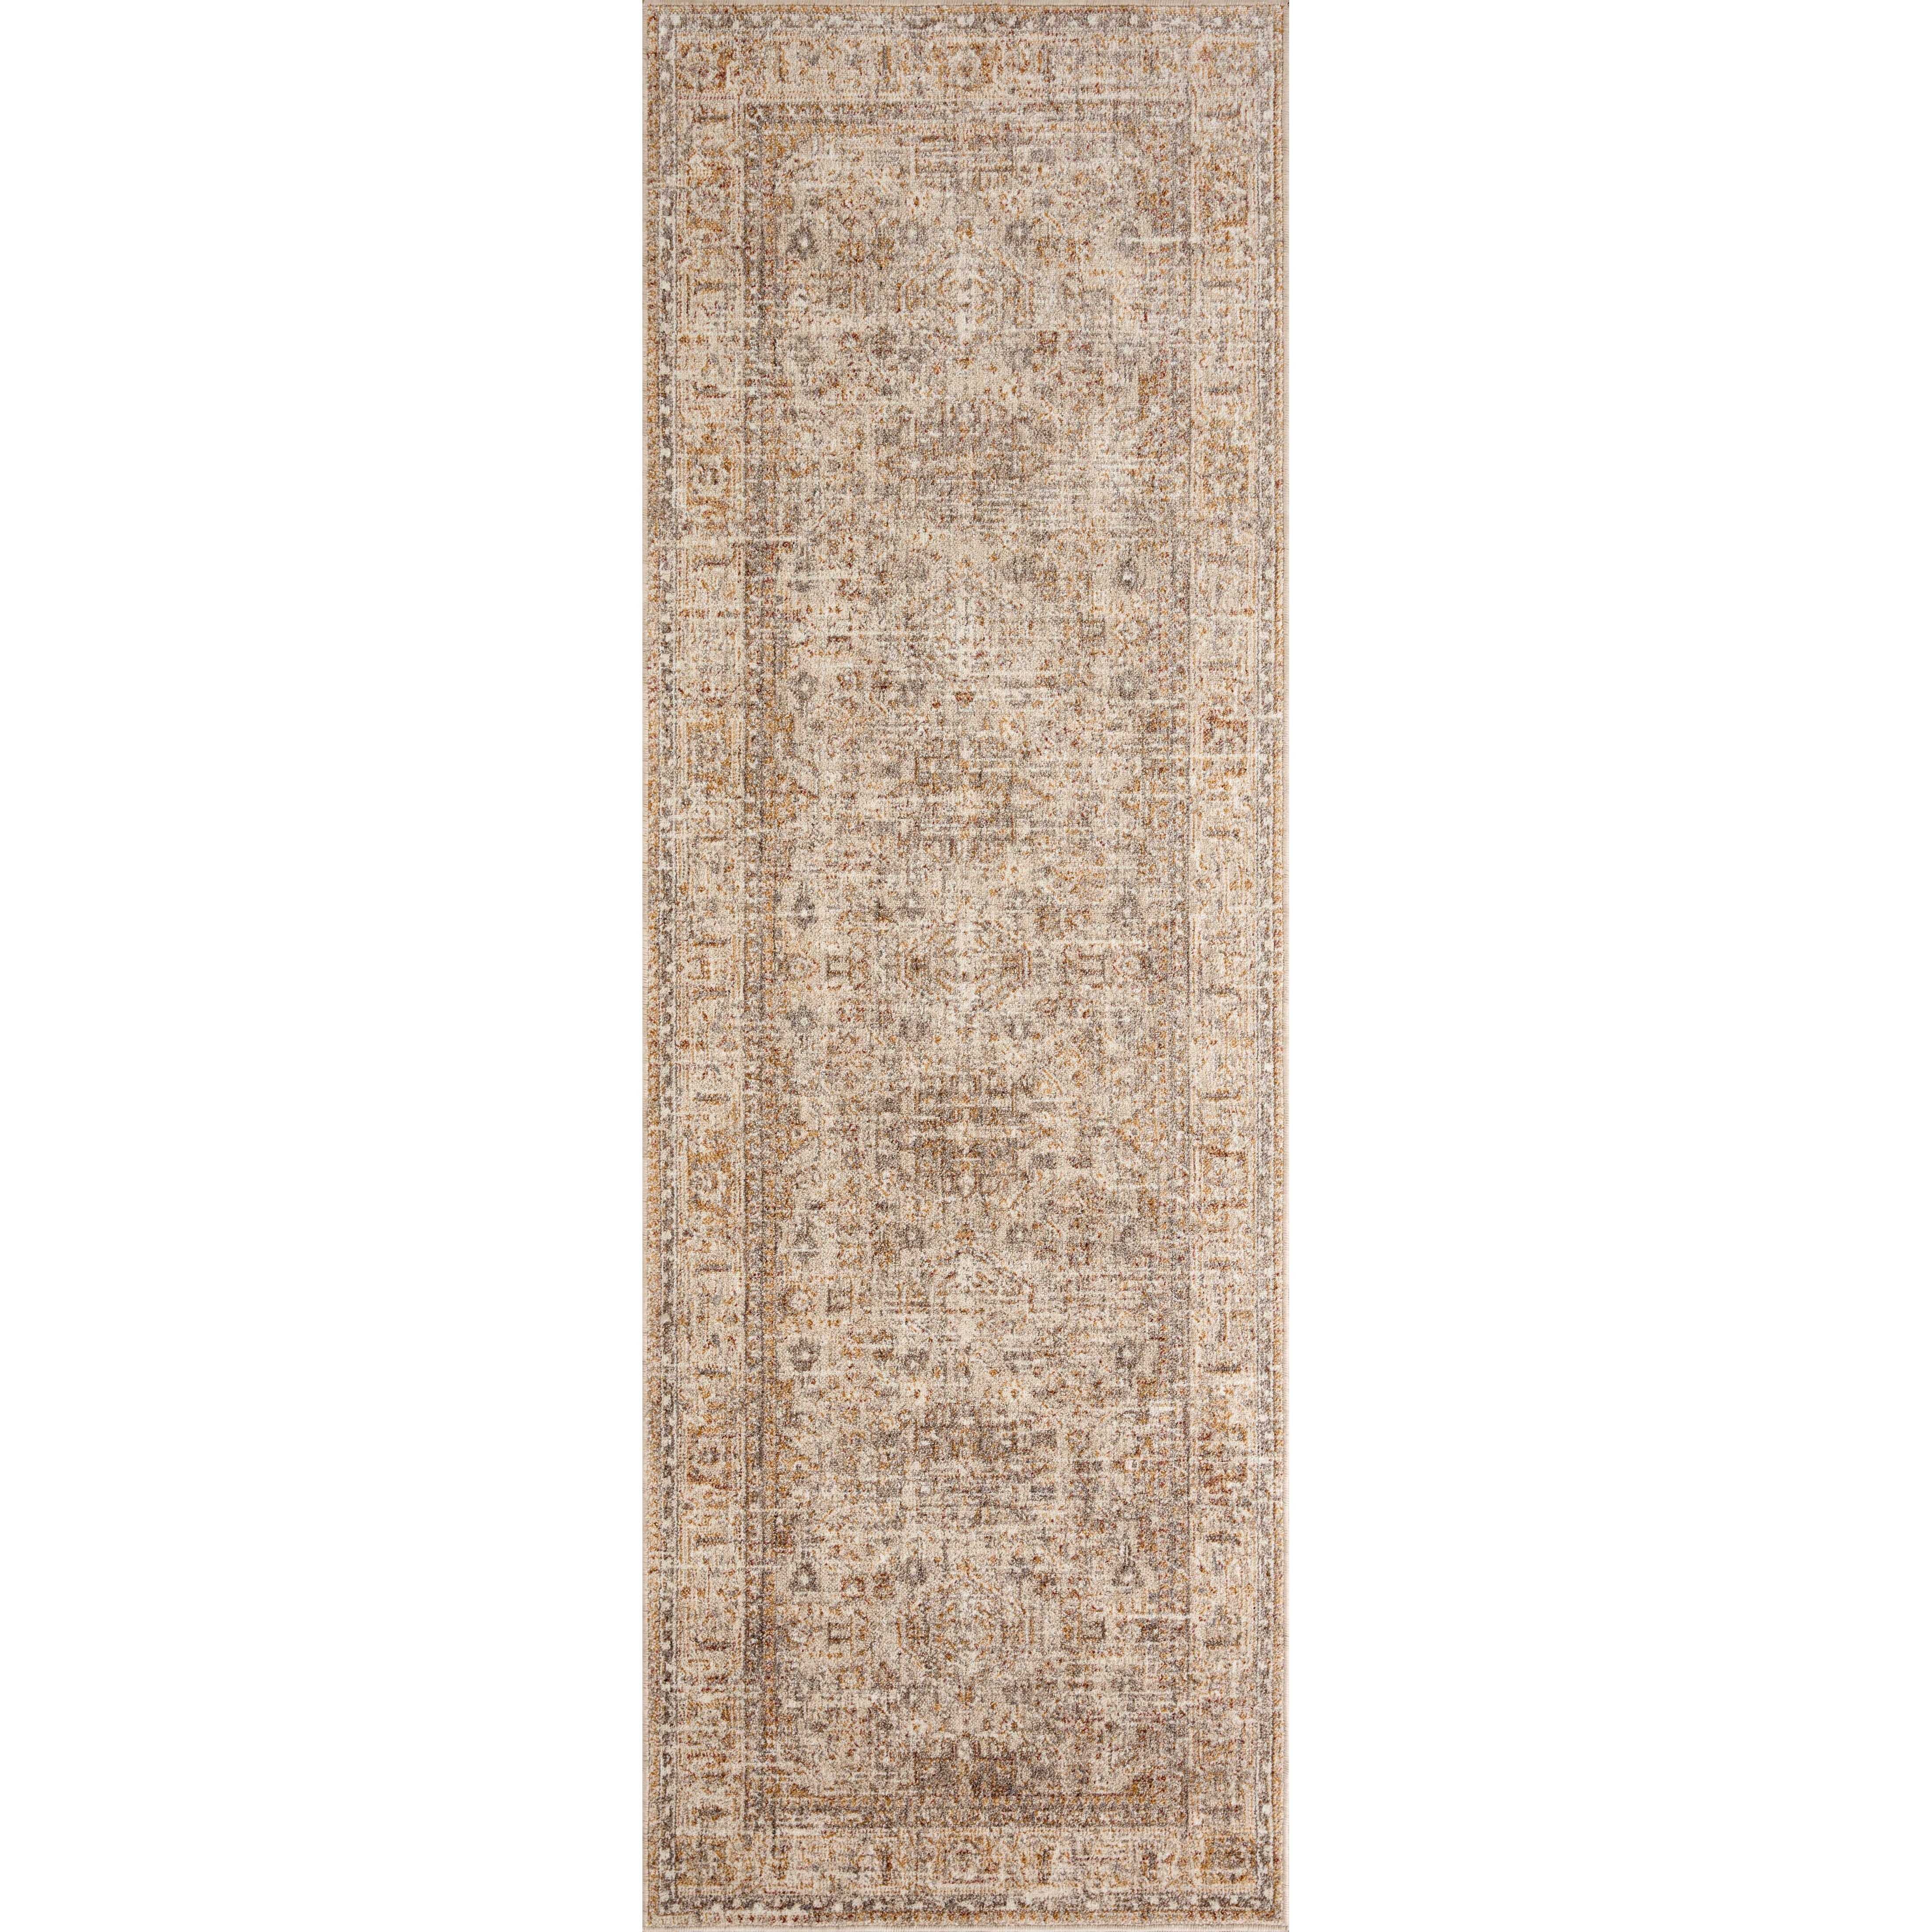 Designed in an expertly distressed antique style, the Angela Rose x Loloi Blake Oatmeal / Spice rug features traditional motifs that have softened into the background, making it an effortless neutral in any room. Muted earth-toned palettes complement a range of furniture, while subtle cream-colored fringe at the edges add texture and framing. Amethyst Home provides interior design services, furniture, rugs, and lighting in the Salt Lake City metro area.